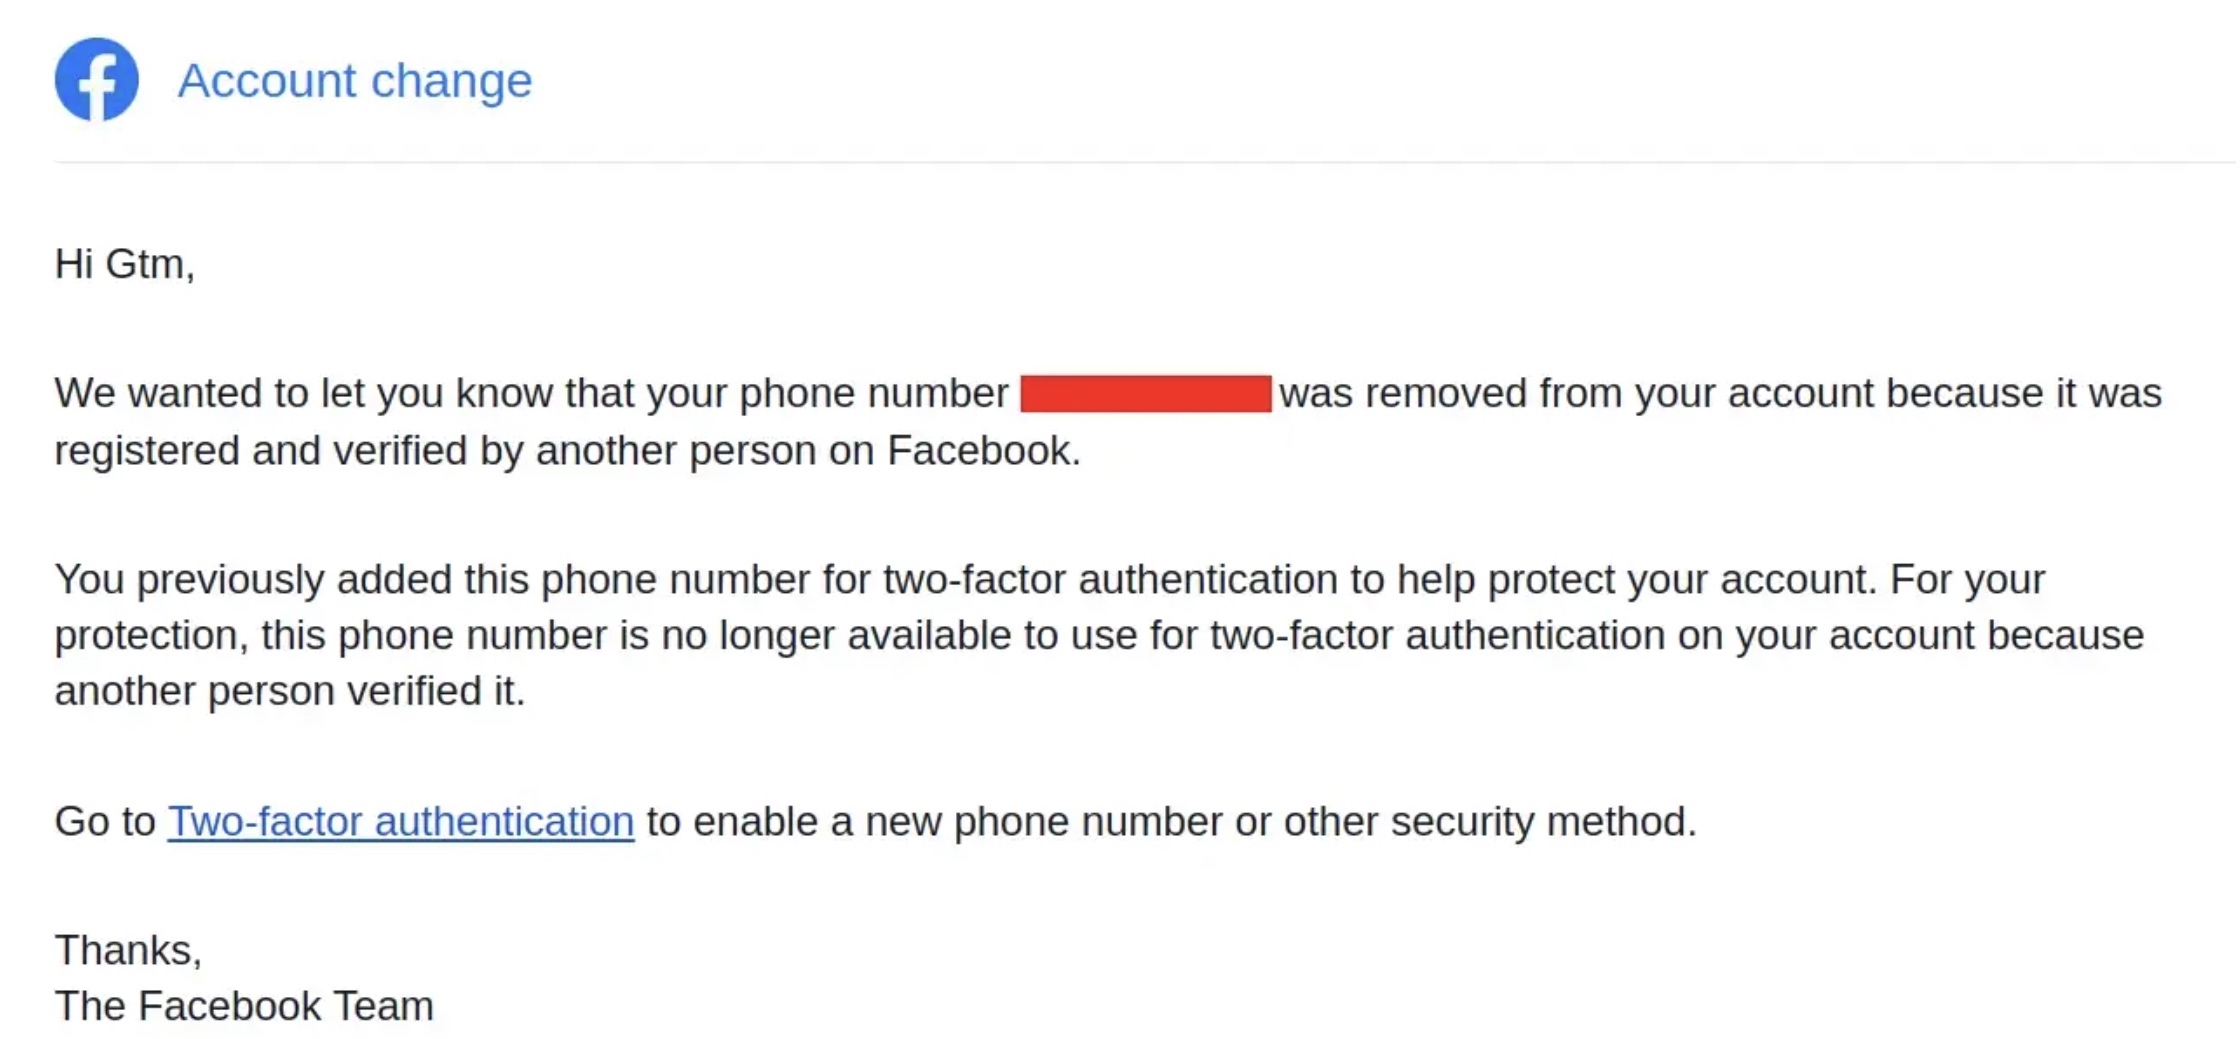  "We wanted to let you know that your phone number registered and verified by another person on Facebook."